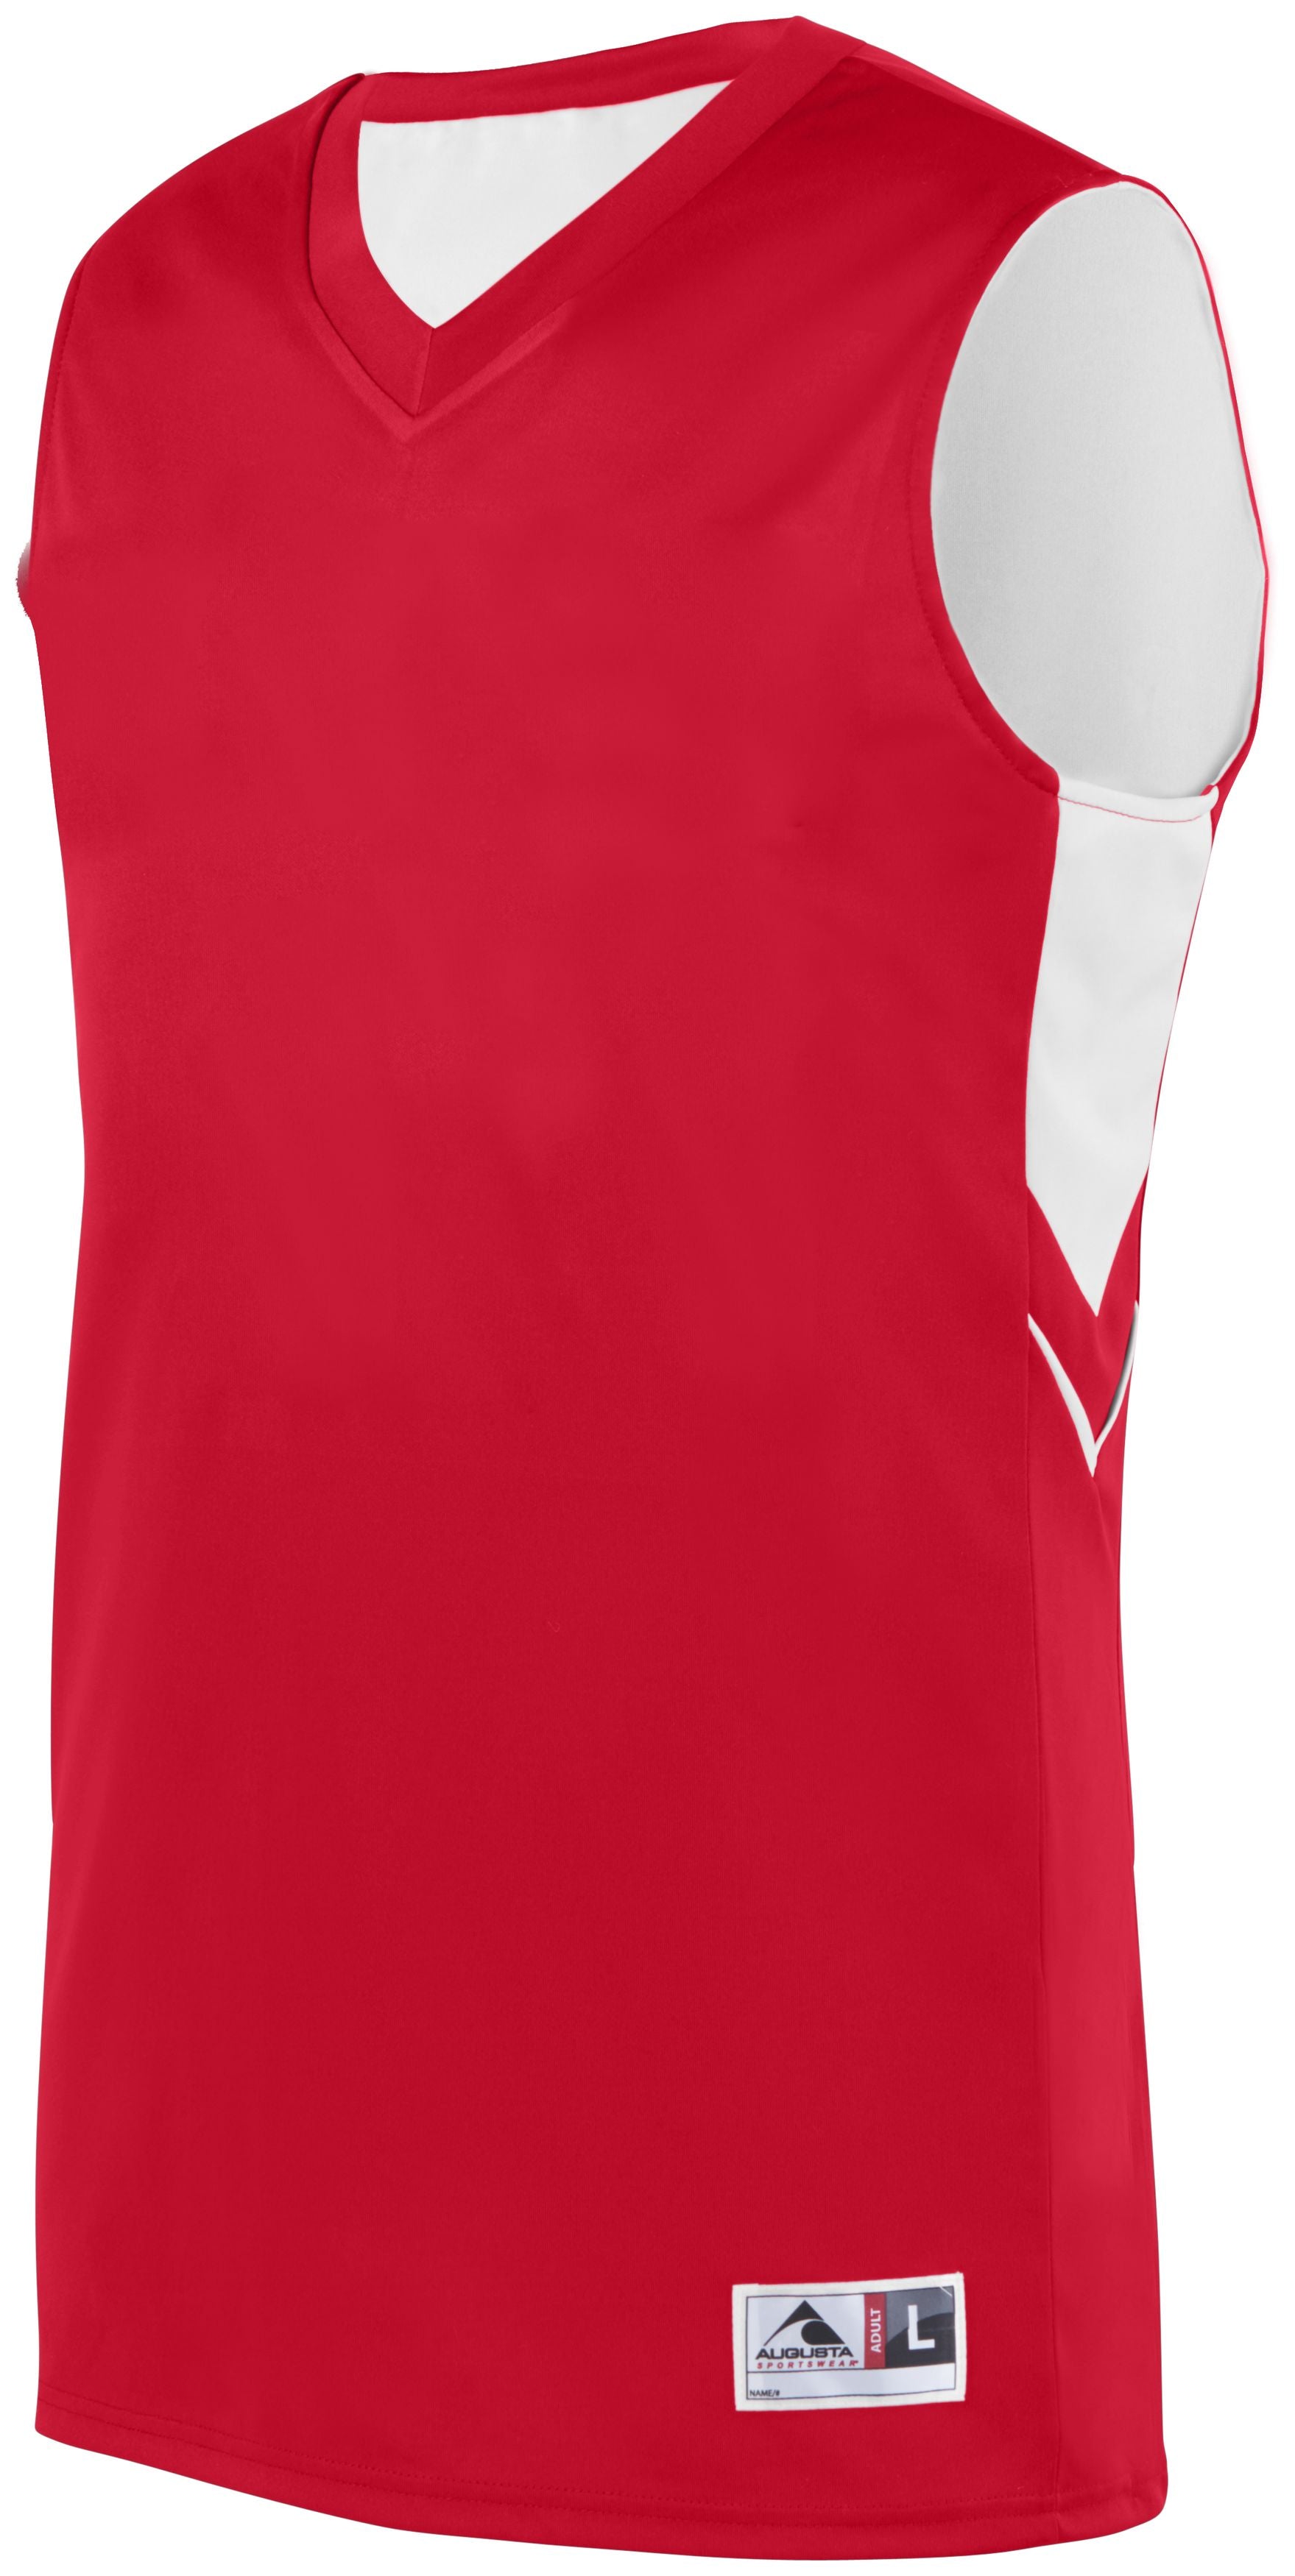 Augusta Sportswear Alley-Oop Reversible Jersey in Red/White  -Part of the Adult, Adult-Jersey, Augusta-Products, Basketball, Shirts, All-Sports, All-Sports-1 product lines at KanaleyCreations.com